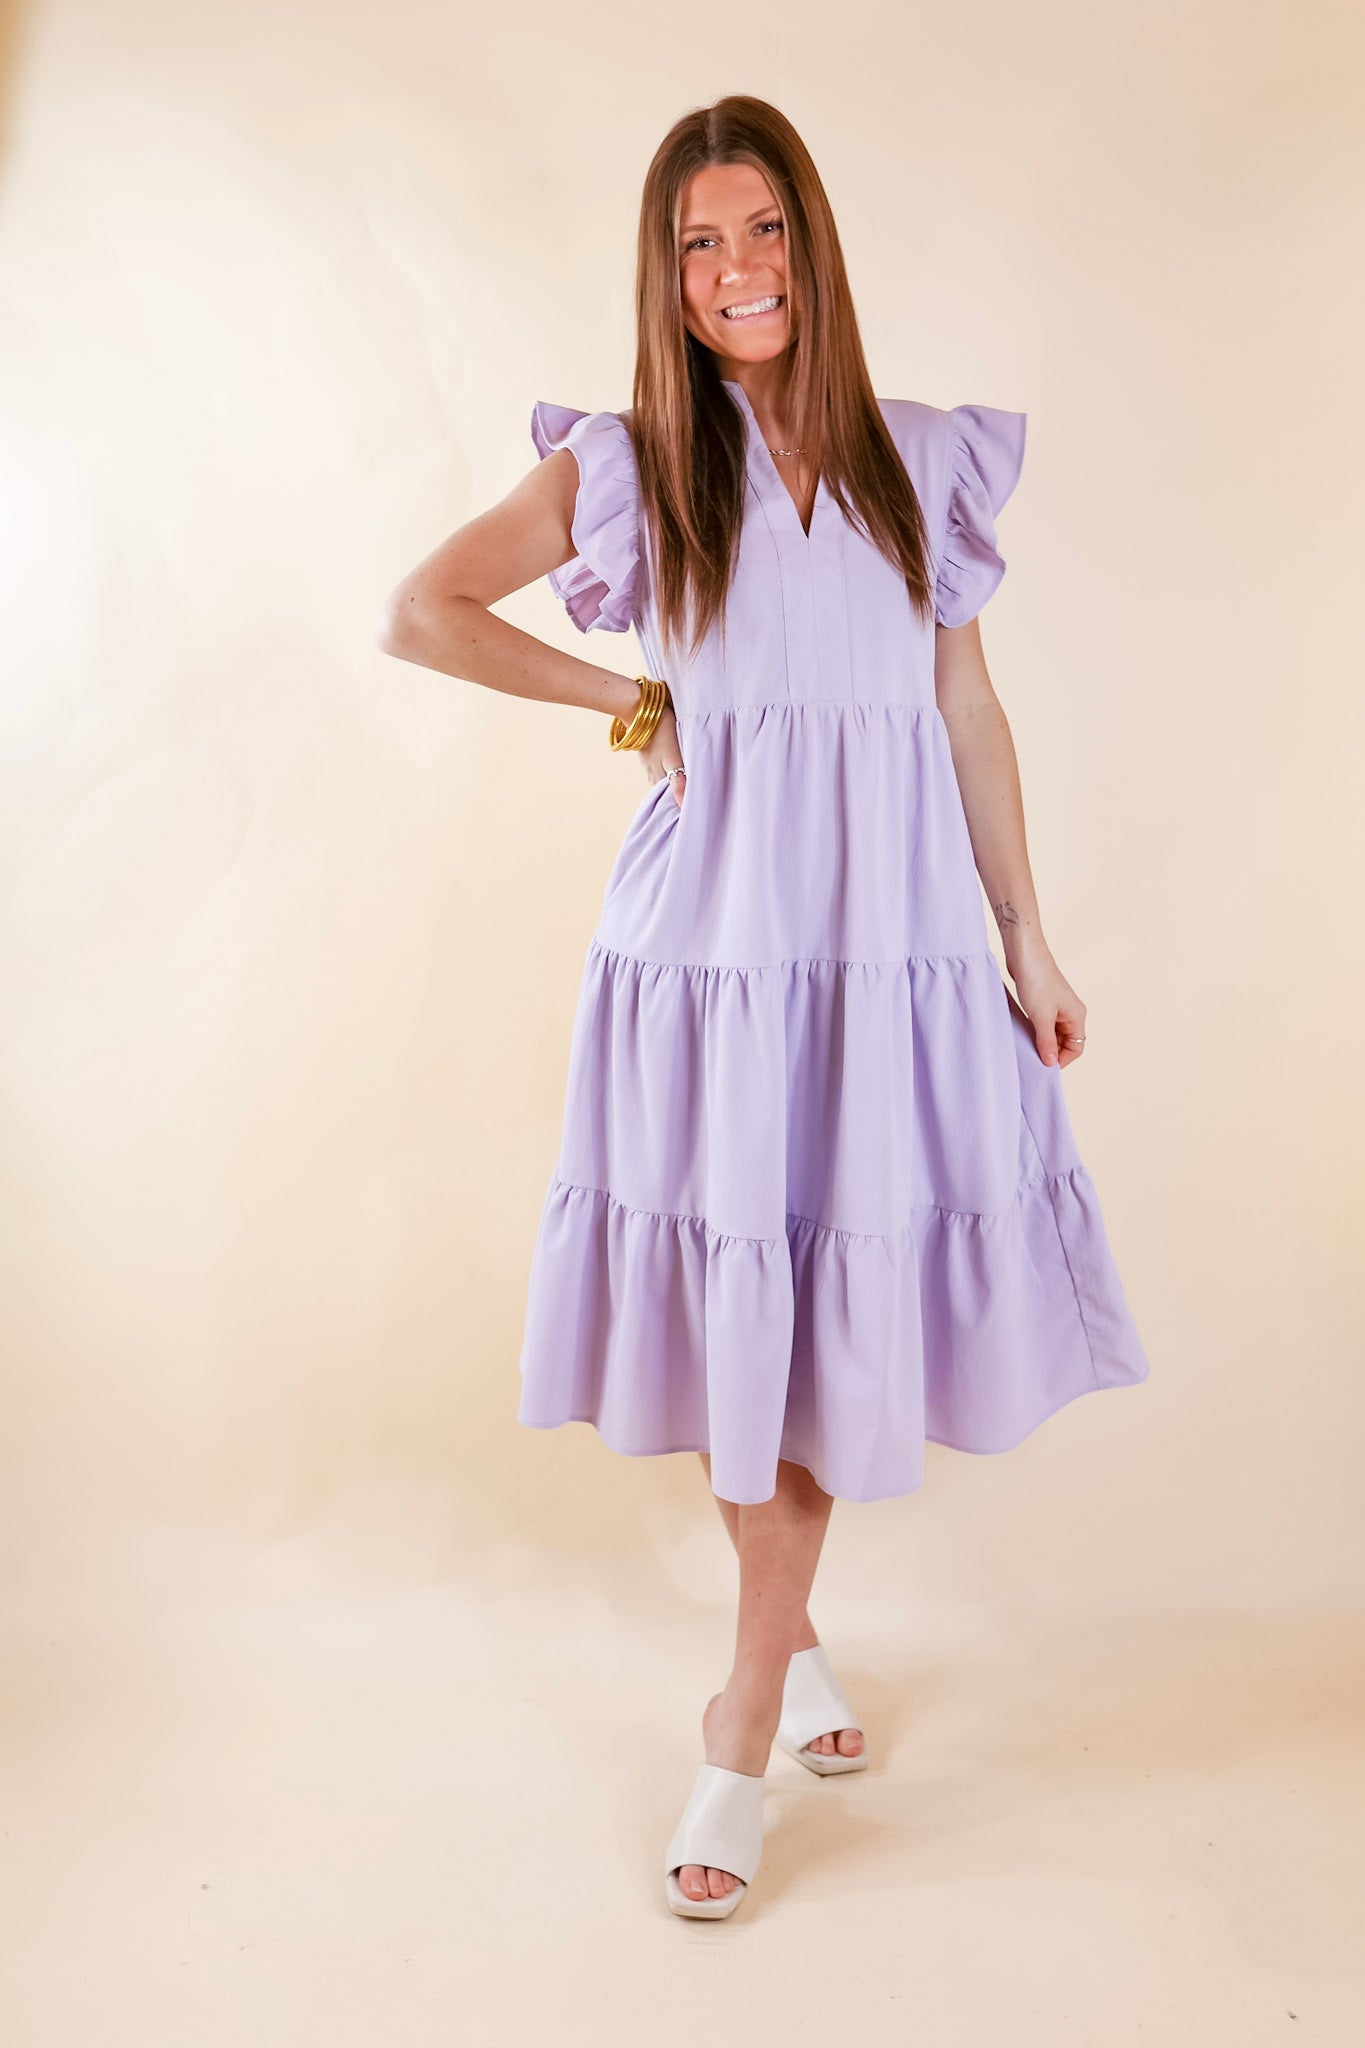 A relaxed fit midi dress in lavender. The dress has a V neckline, short ruffled sleeves, pockets, and a tiered skirt. Item is pictured on a pale pink background